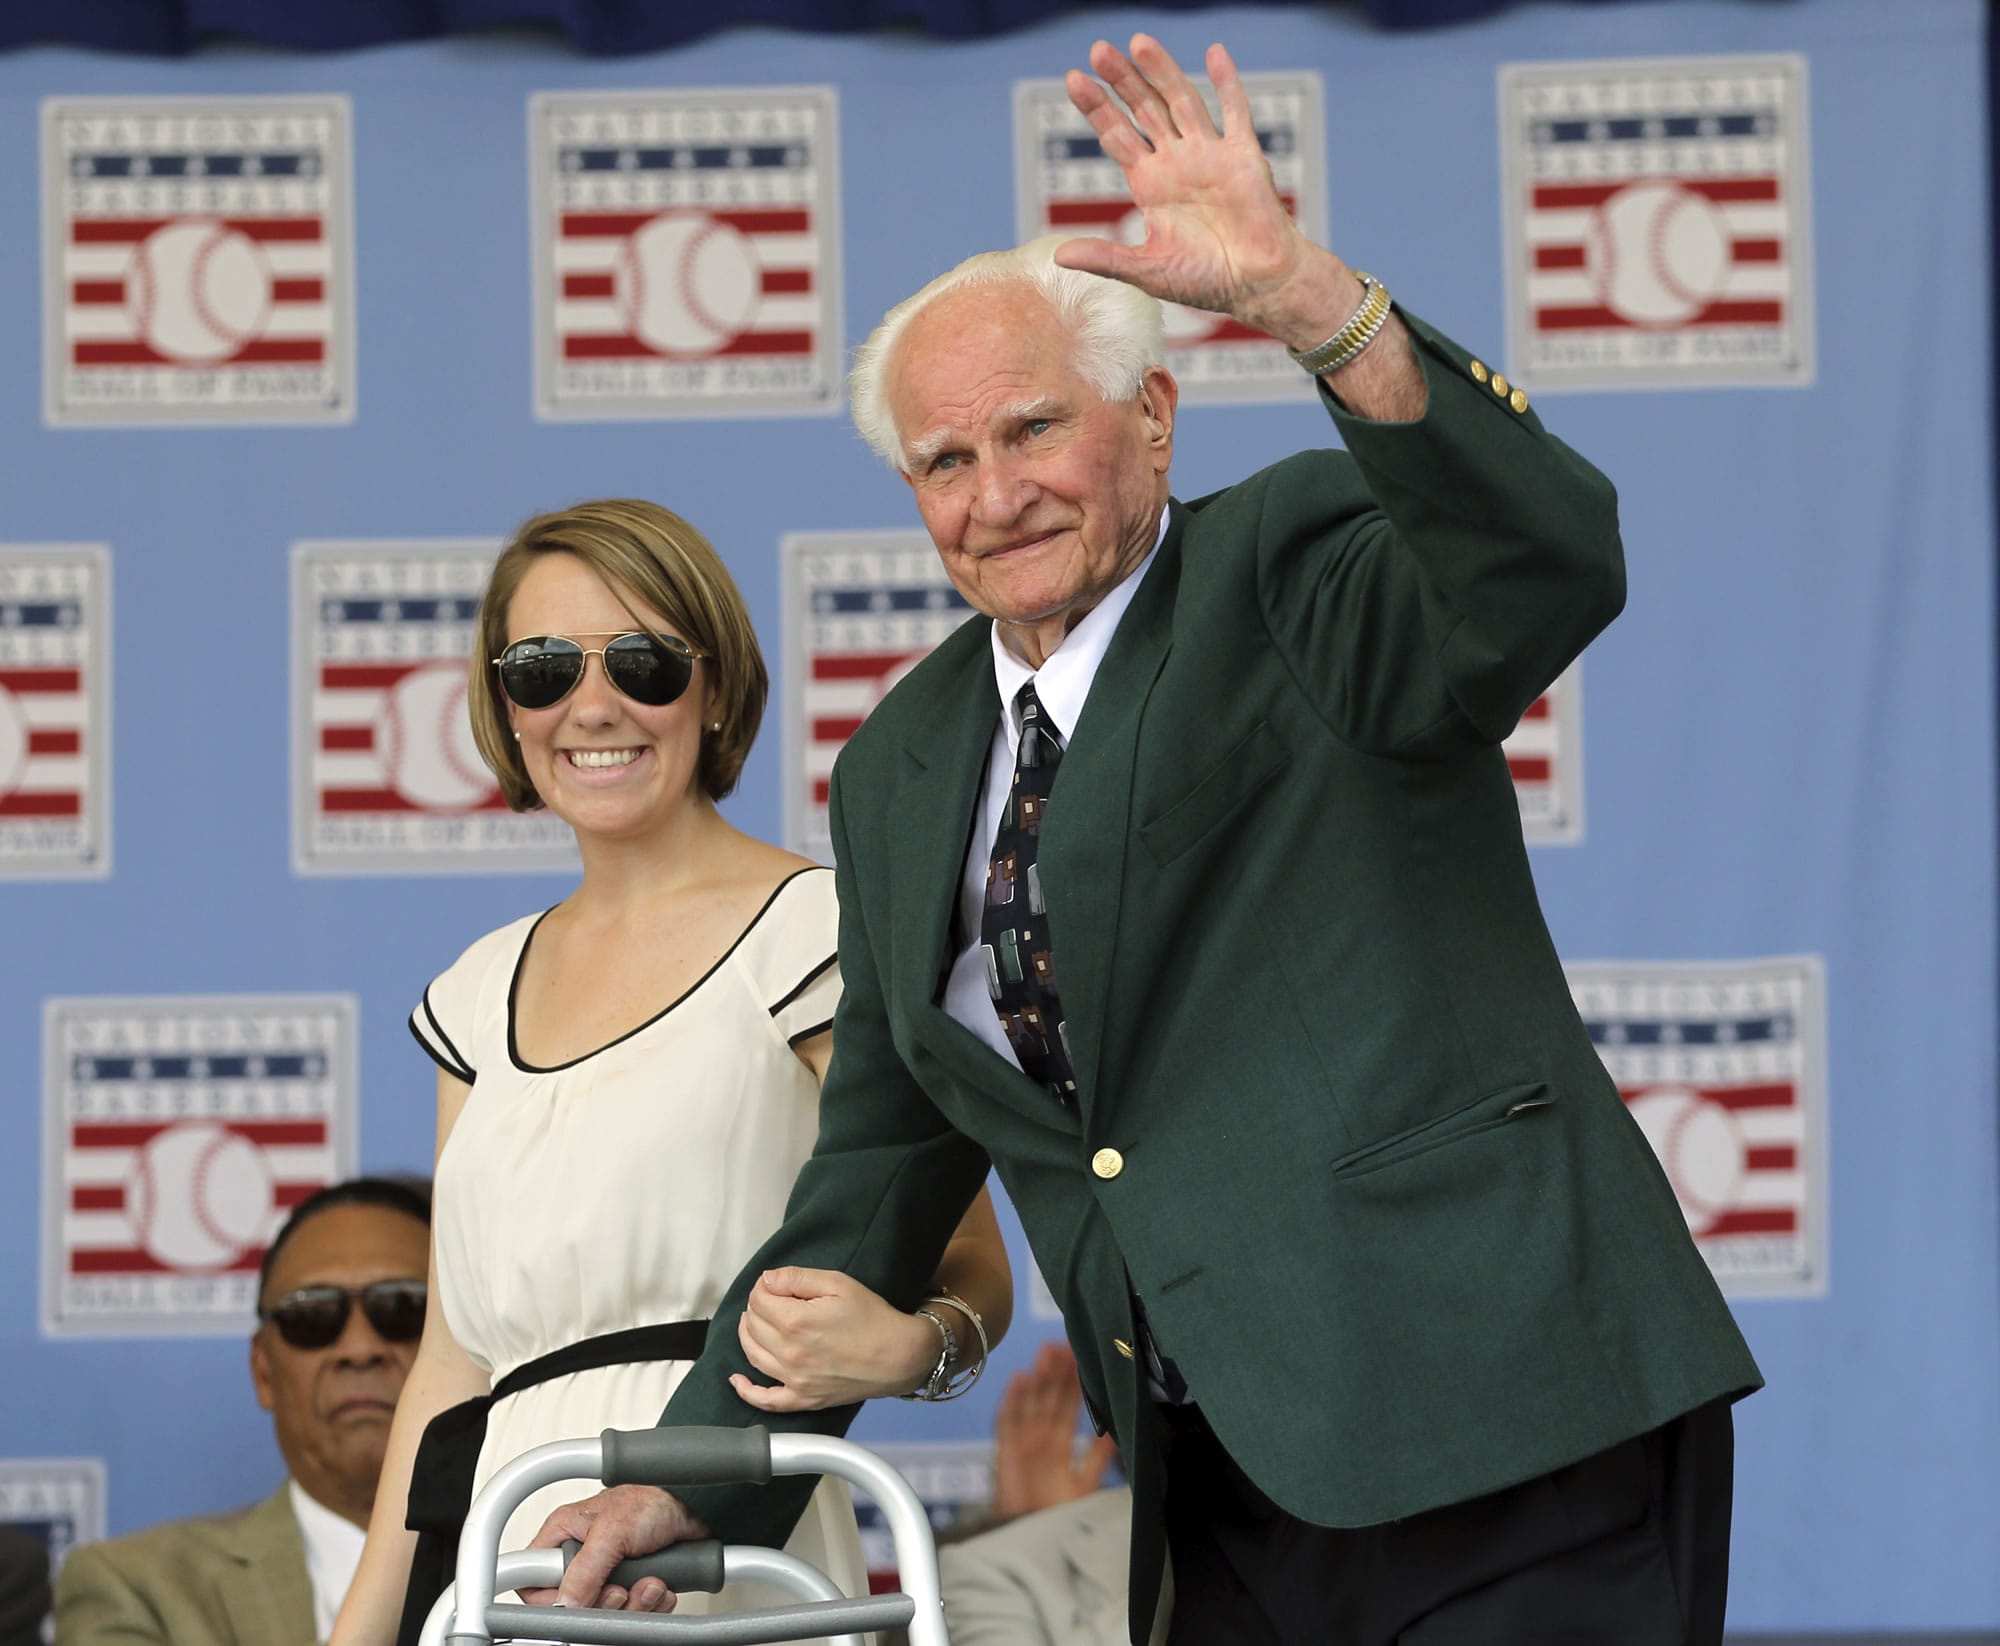 Hall of Famer Bobby Doerr waves during Baseball Hall of Fame induction ceremonies in Cooperstown, N.Y., in July 2011. Doerr, a Hall of Fame second baseman who was dubbed the "silent captain" by longtime Red Sox teammate and life-long friend Ted Williams, has died. He was 99.